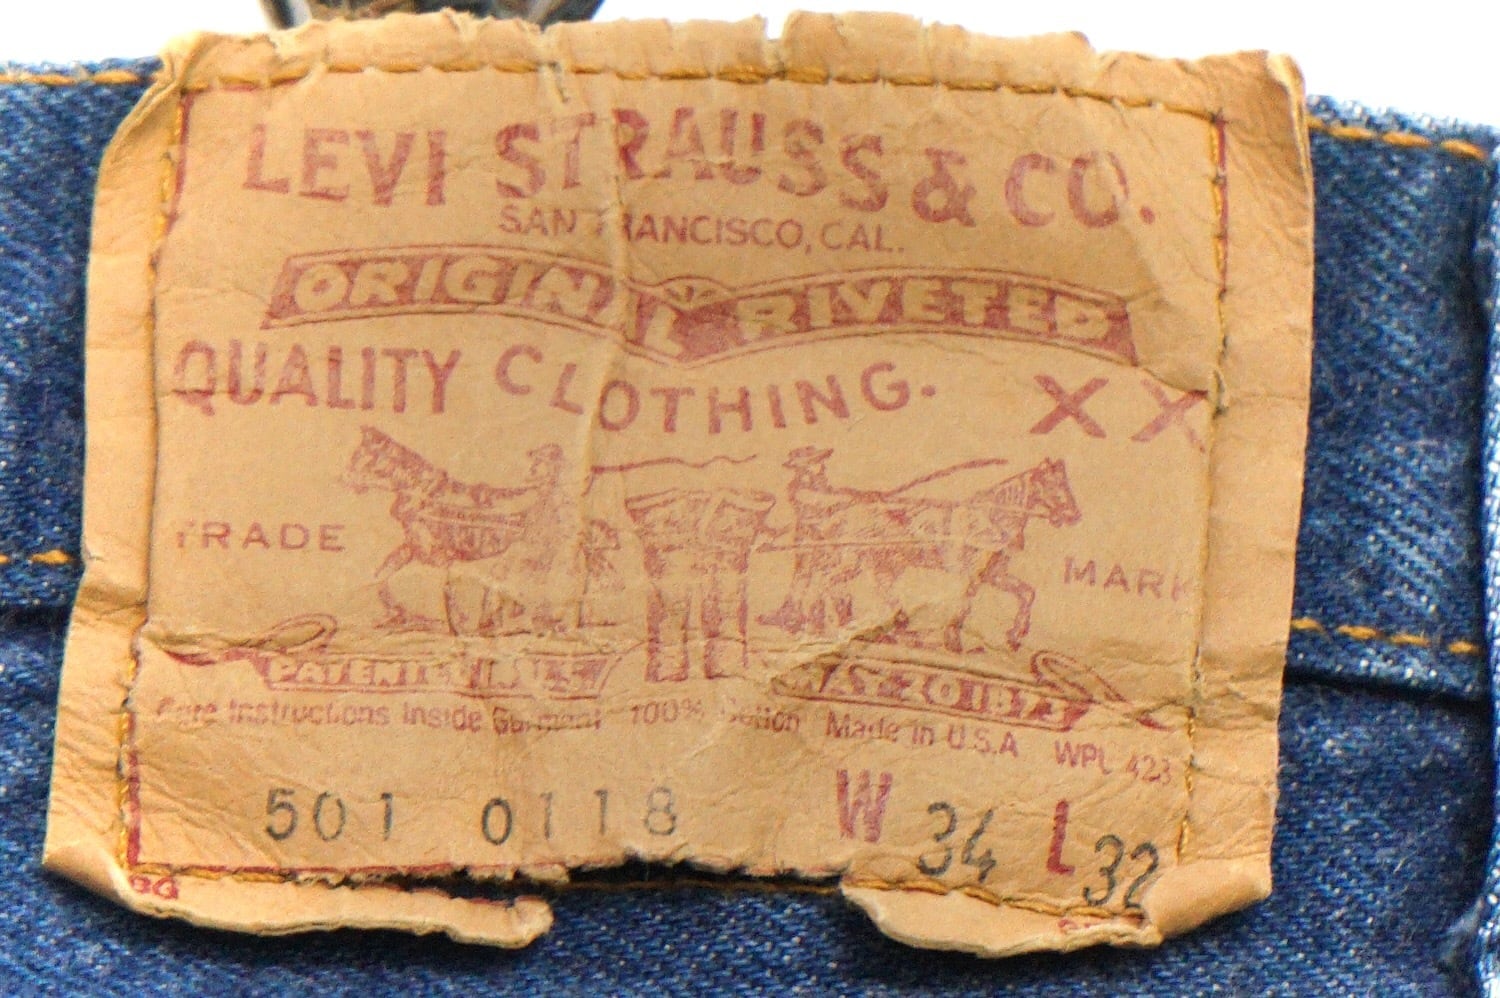 2843 Levi's リーバイス 501 0118 88年製 アメリカ製 Made in U.S.A. ...